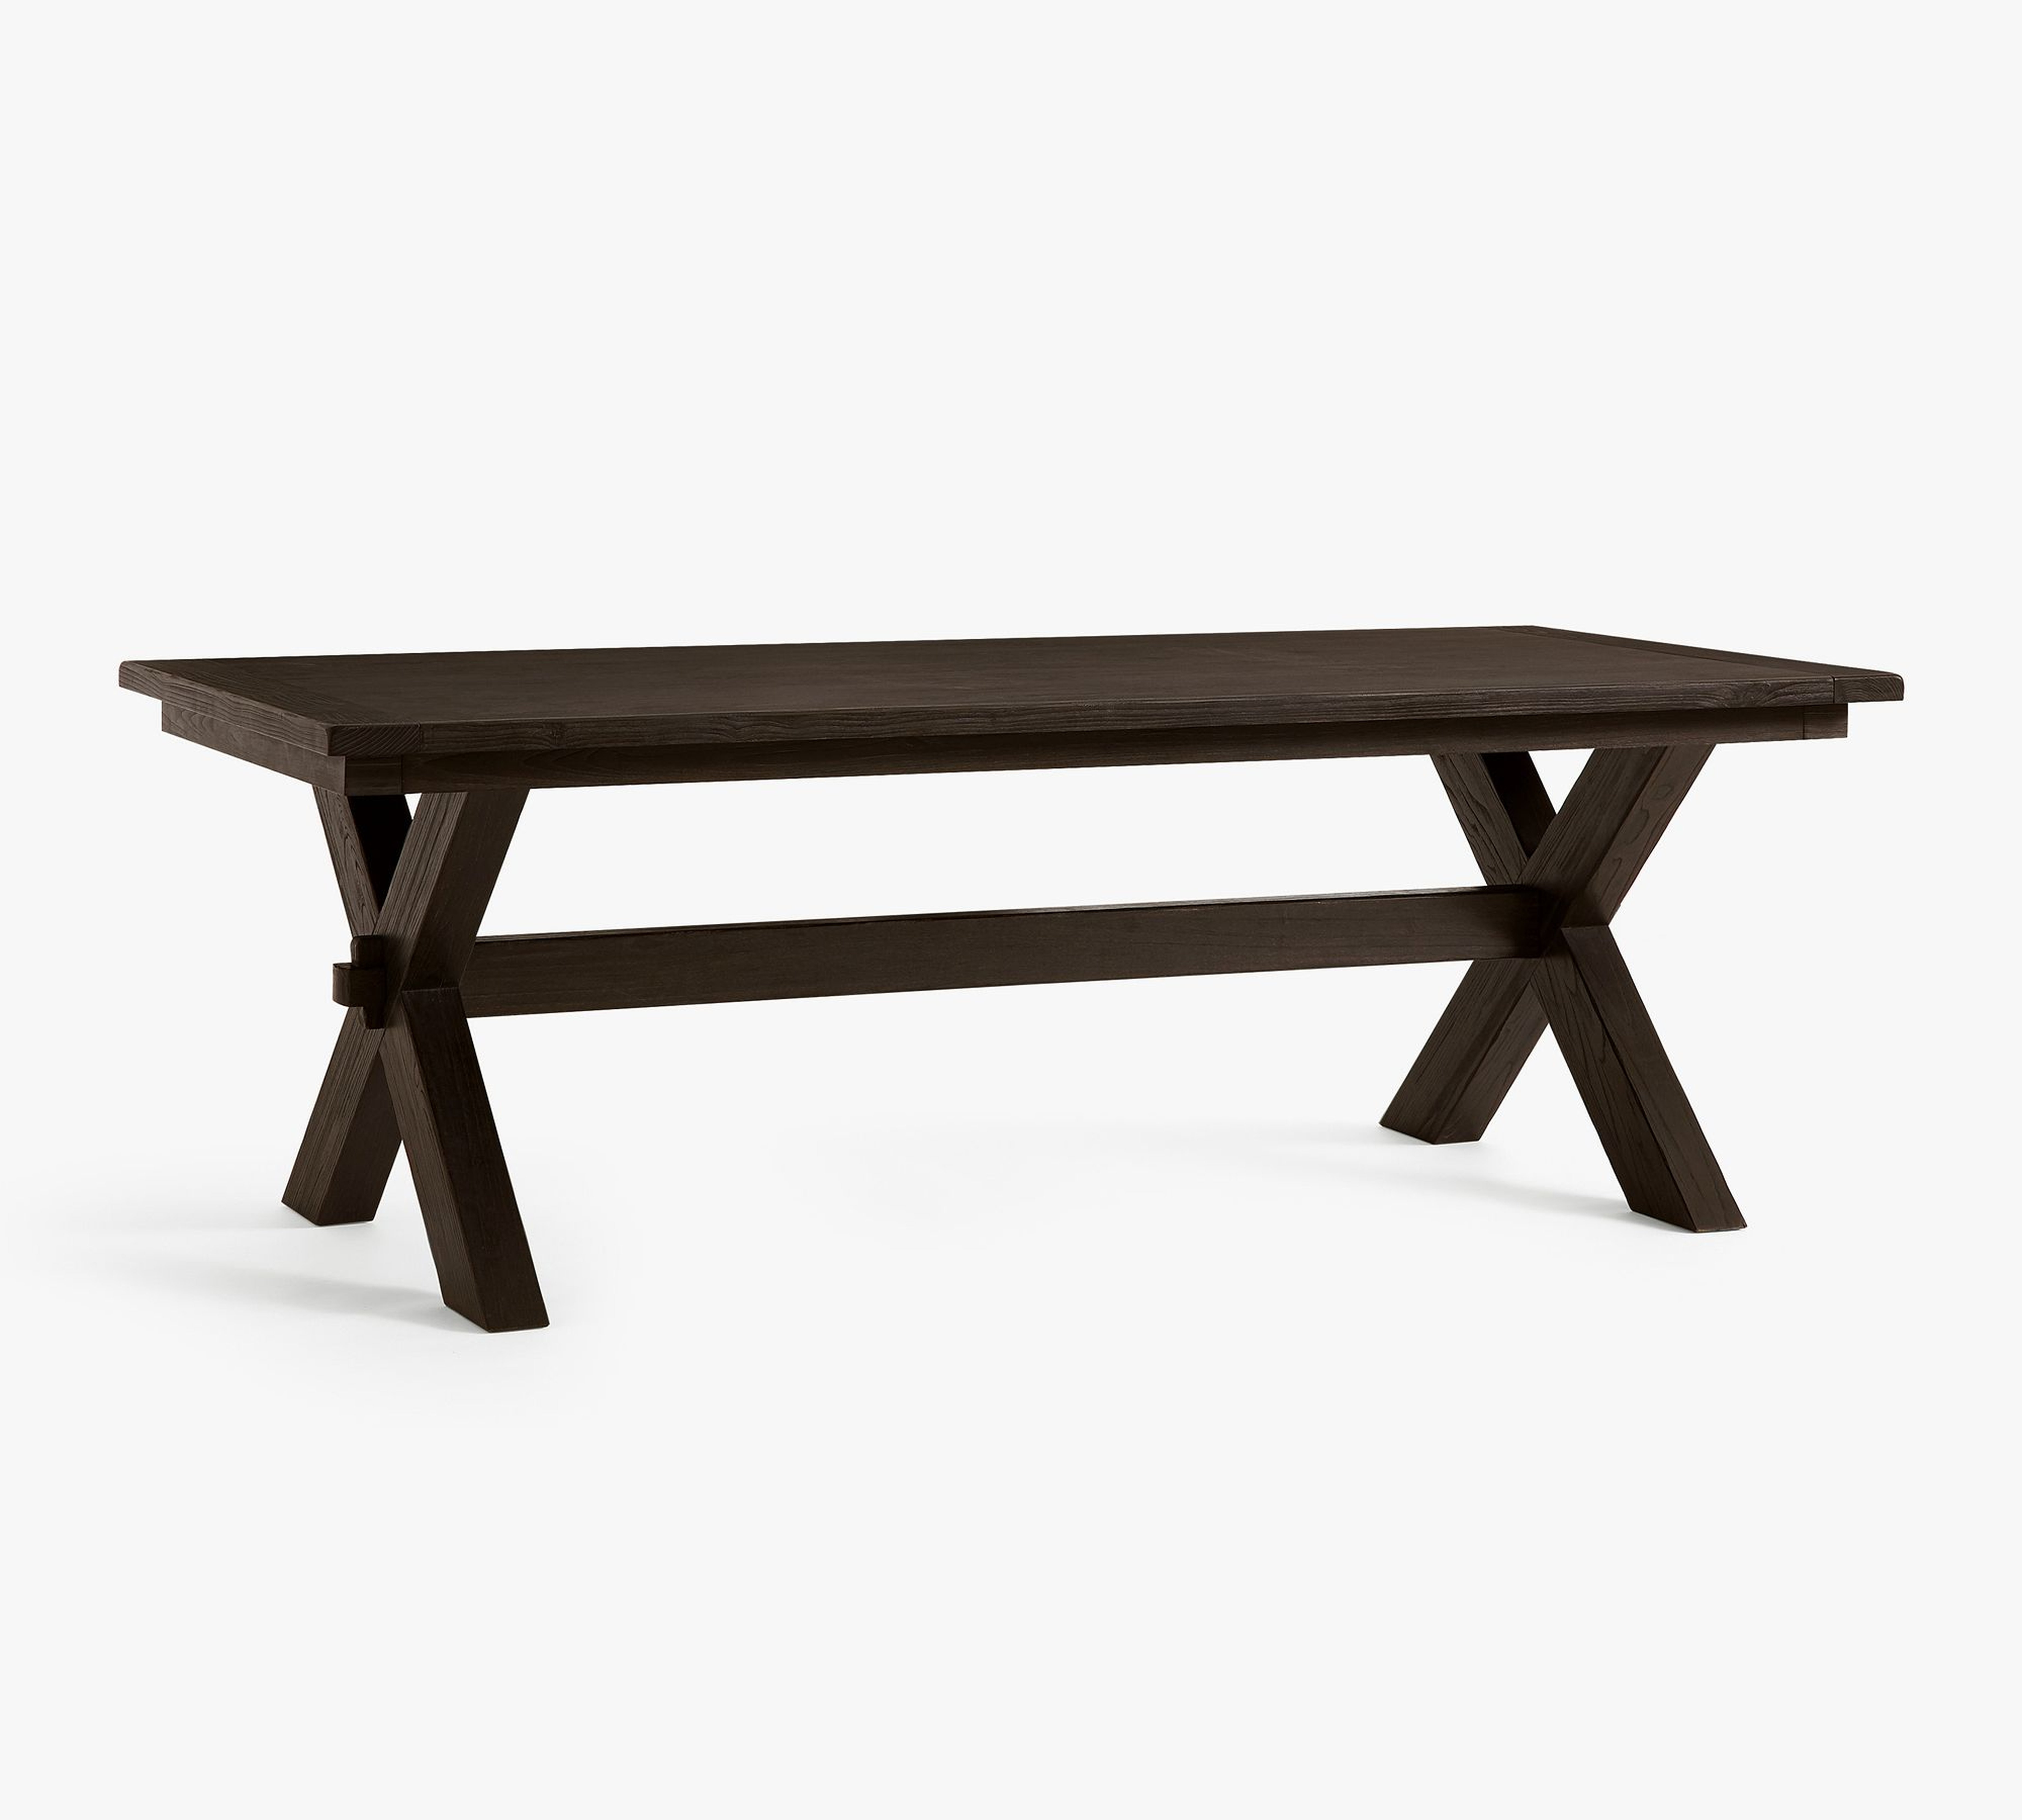 Toscana Extending Dining Table, Dusty Charcoal, 88.5" - 124.5" L - Pottery Barn